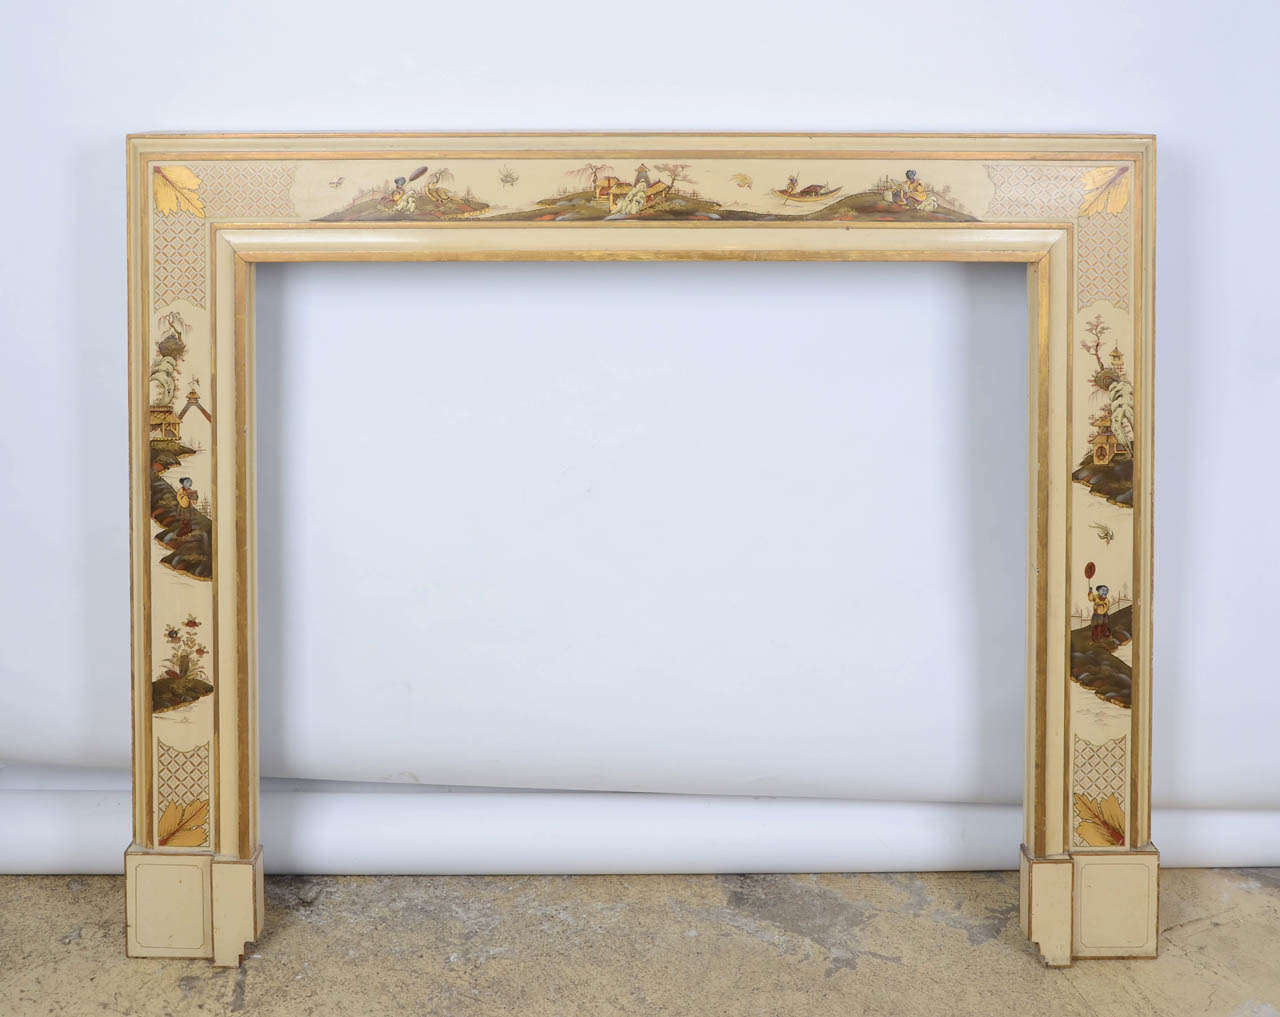 A very special fire surround dating from the 1930s. This lacquered wooden fire surround has exquisite 'Chinoiserie' illustrations painted in muted tones and accented with gold, with Oriental-inspired decoration depicting a pastoral and waterside